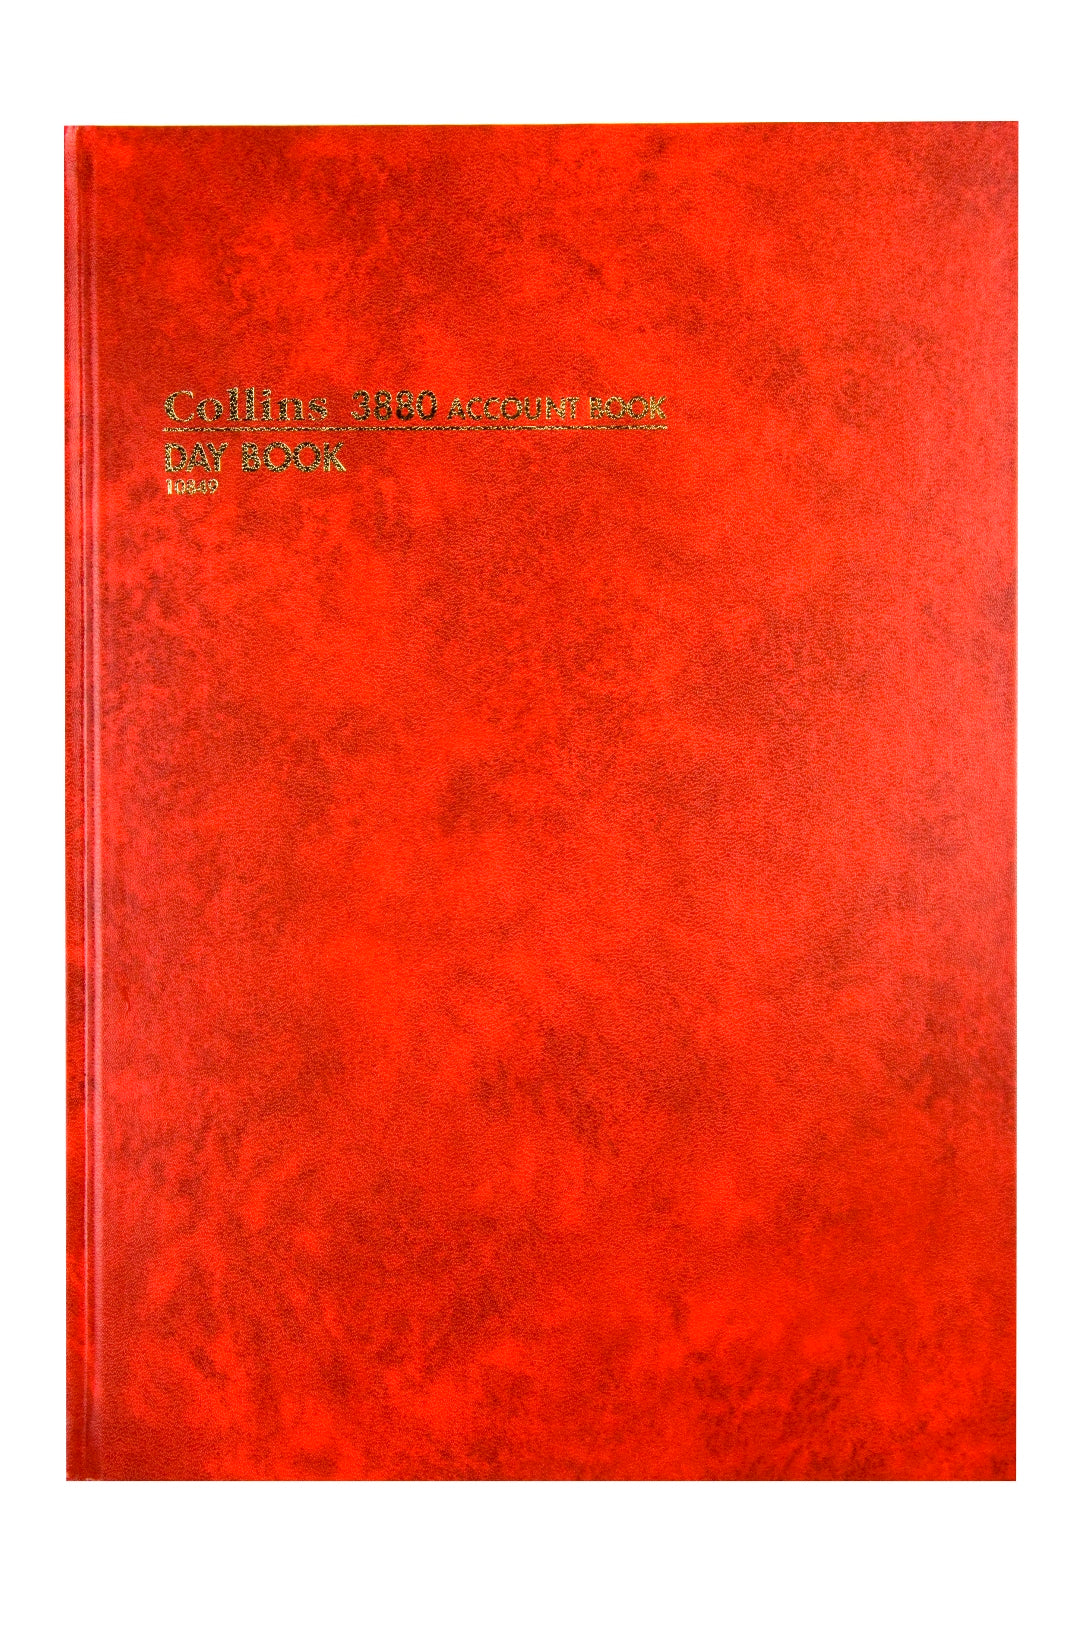 Account Book '3880' Series Day Book Default Title